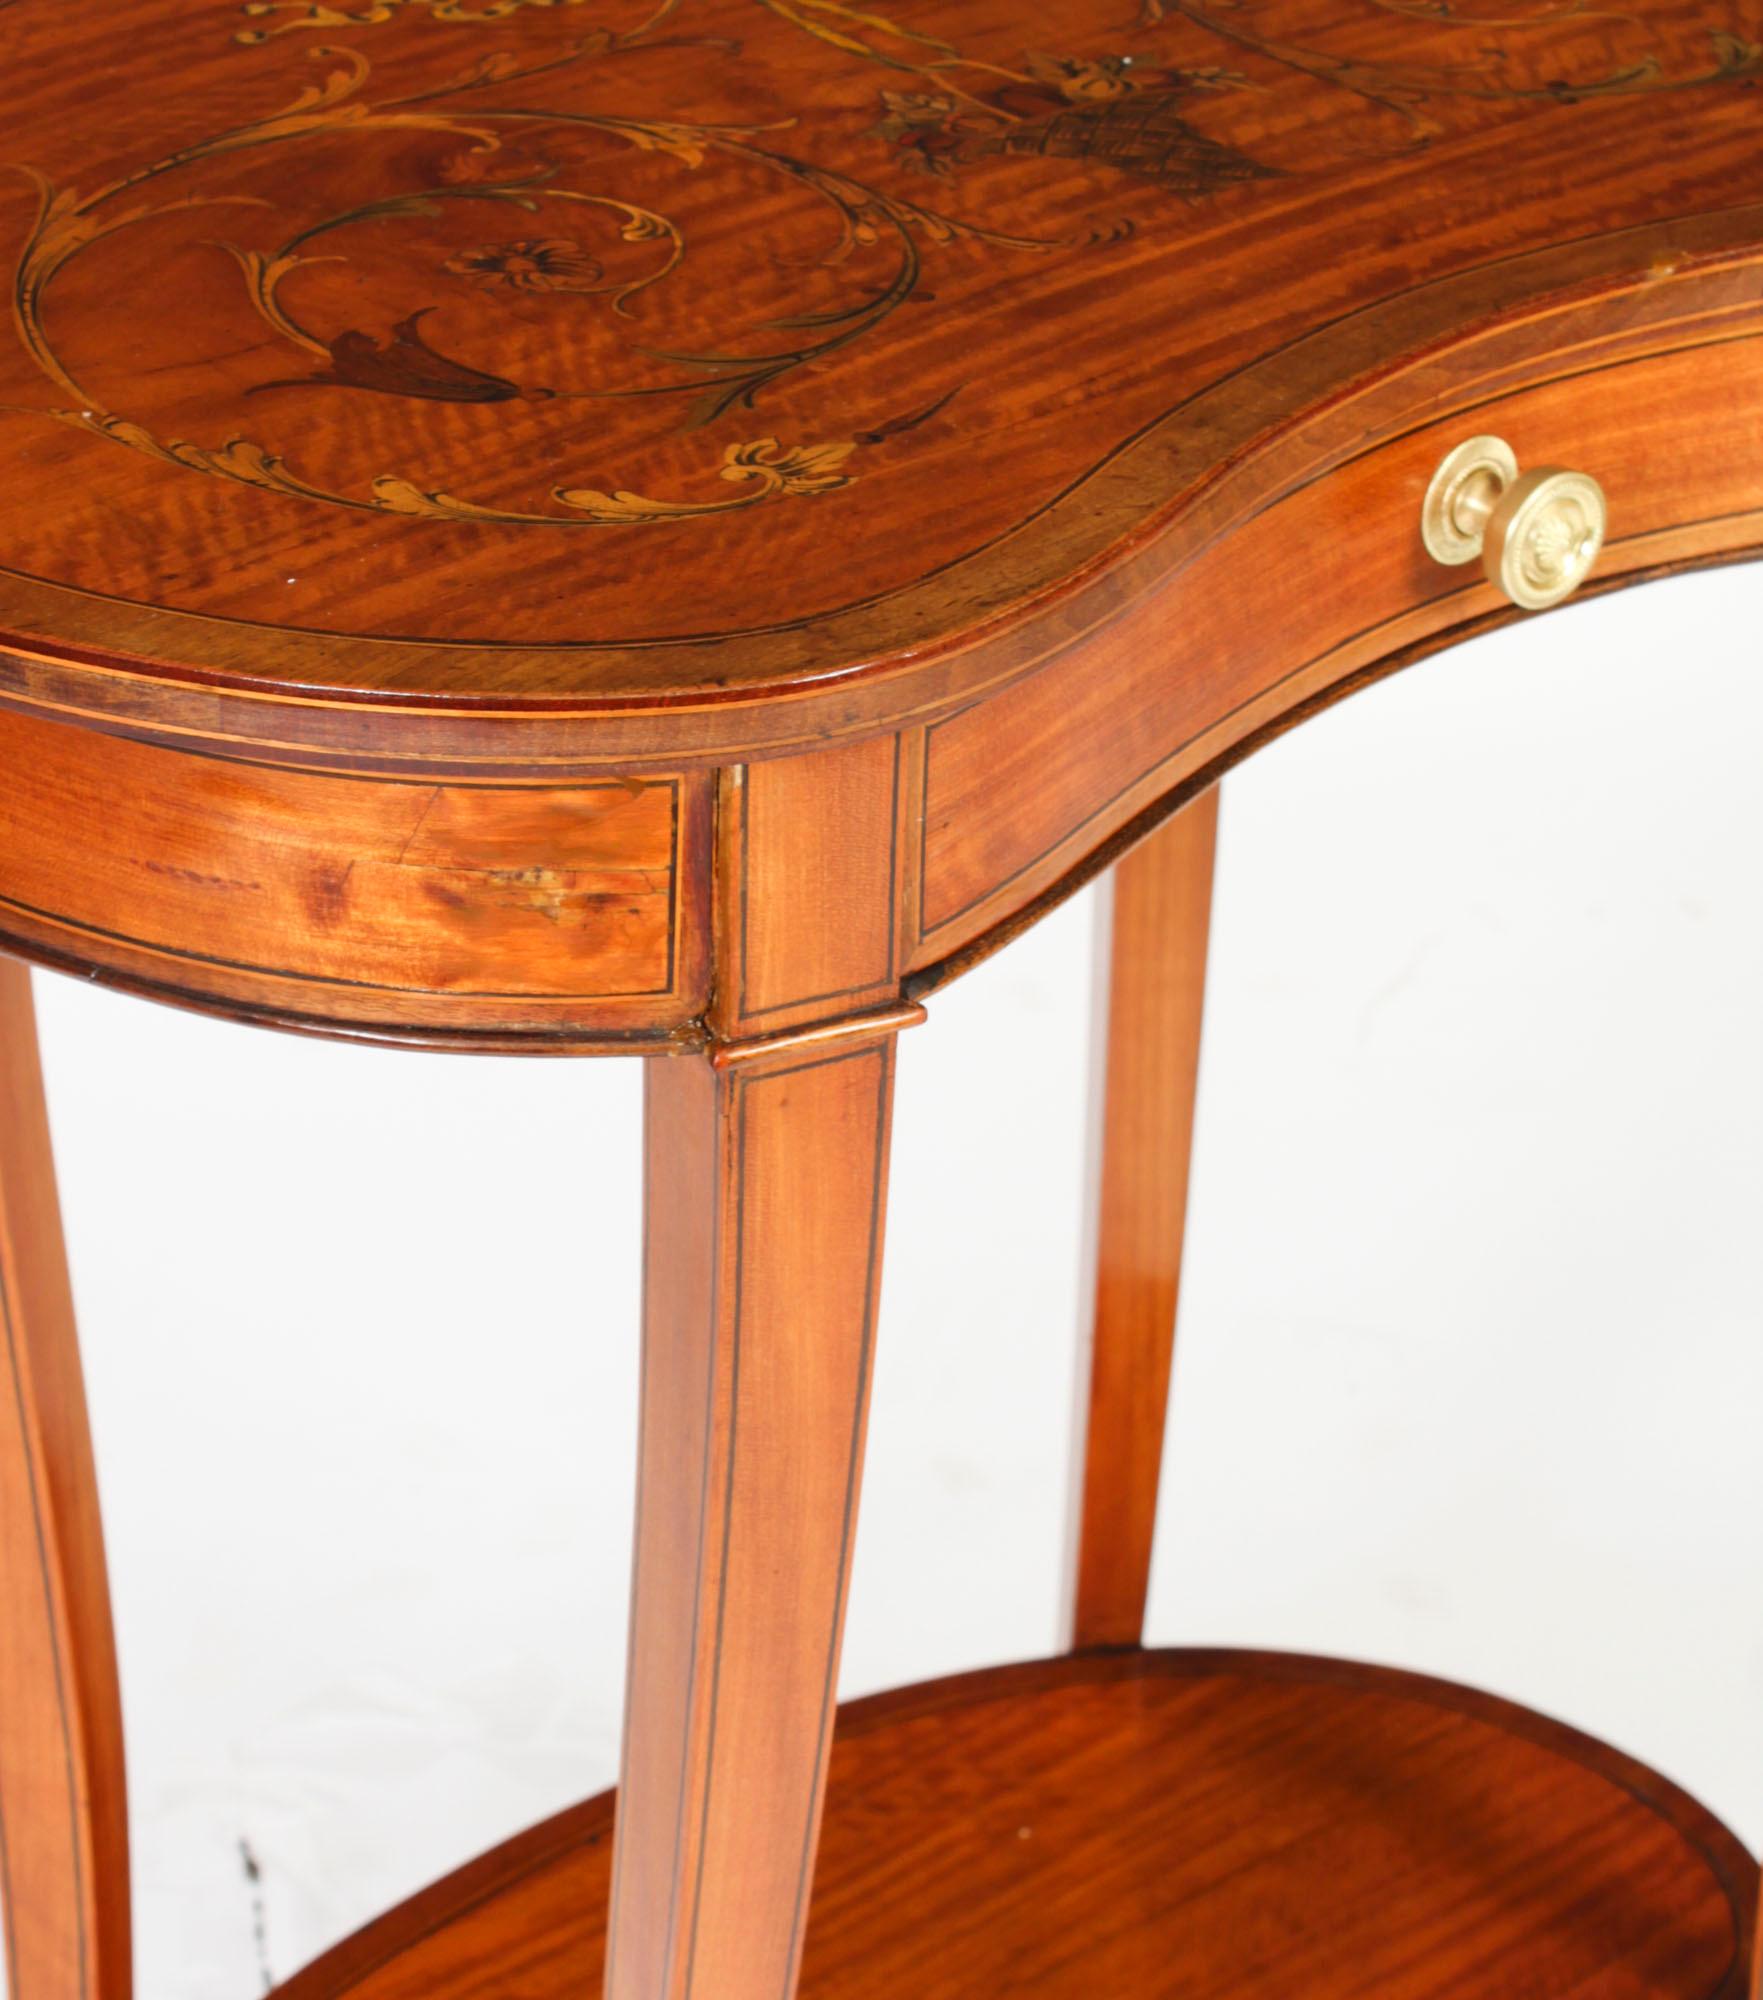 Antique English Marquetry Kidney Shaped Occasionally Tables 19th Century For Sale 6